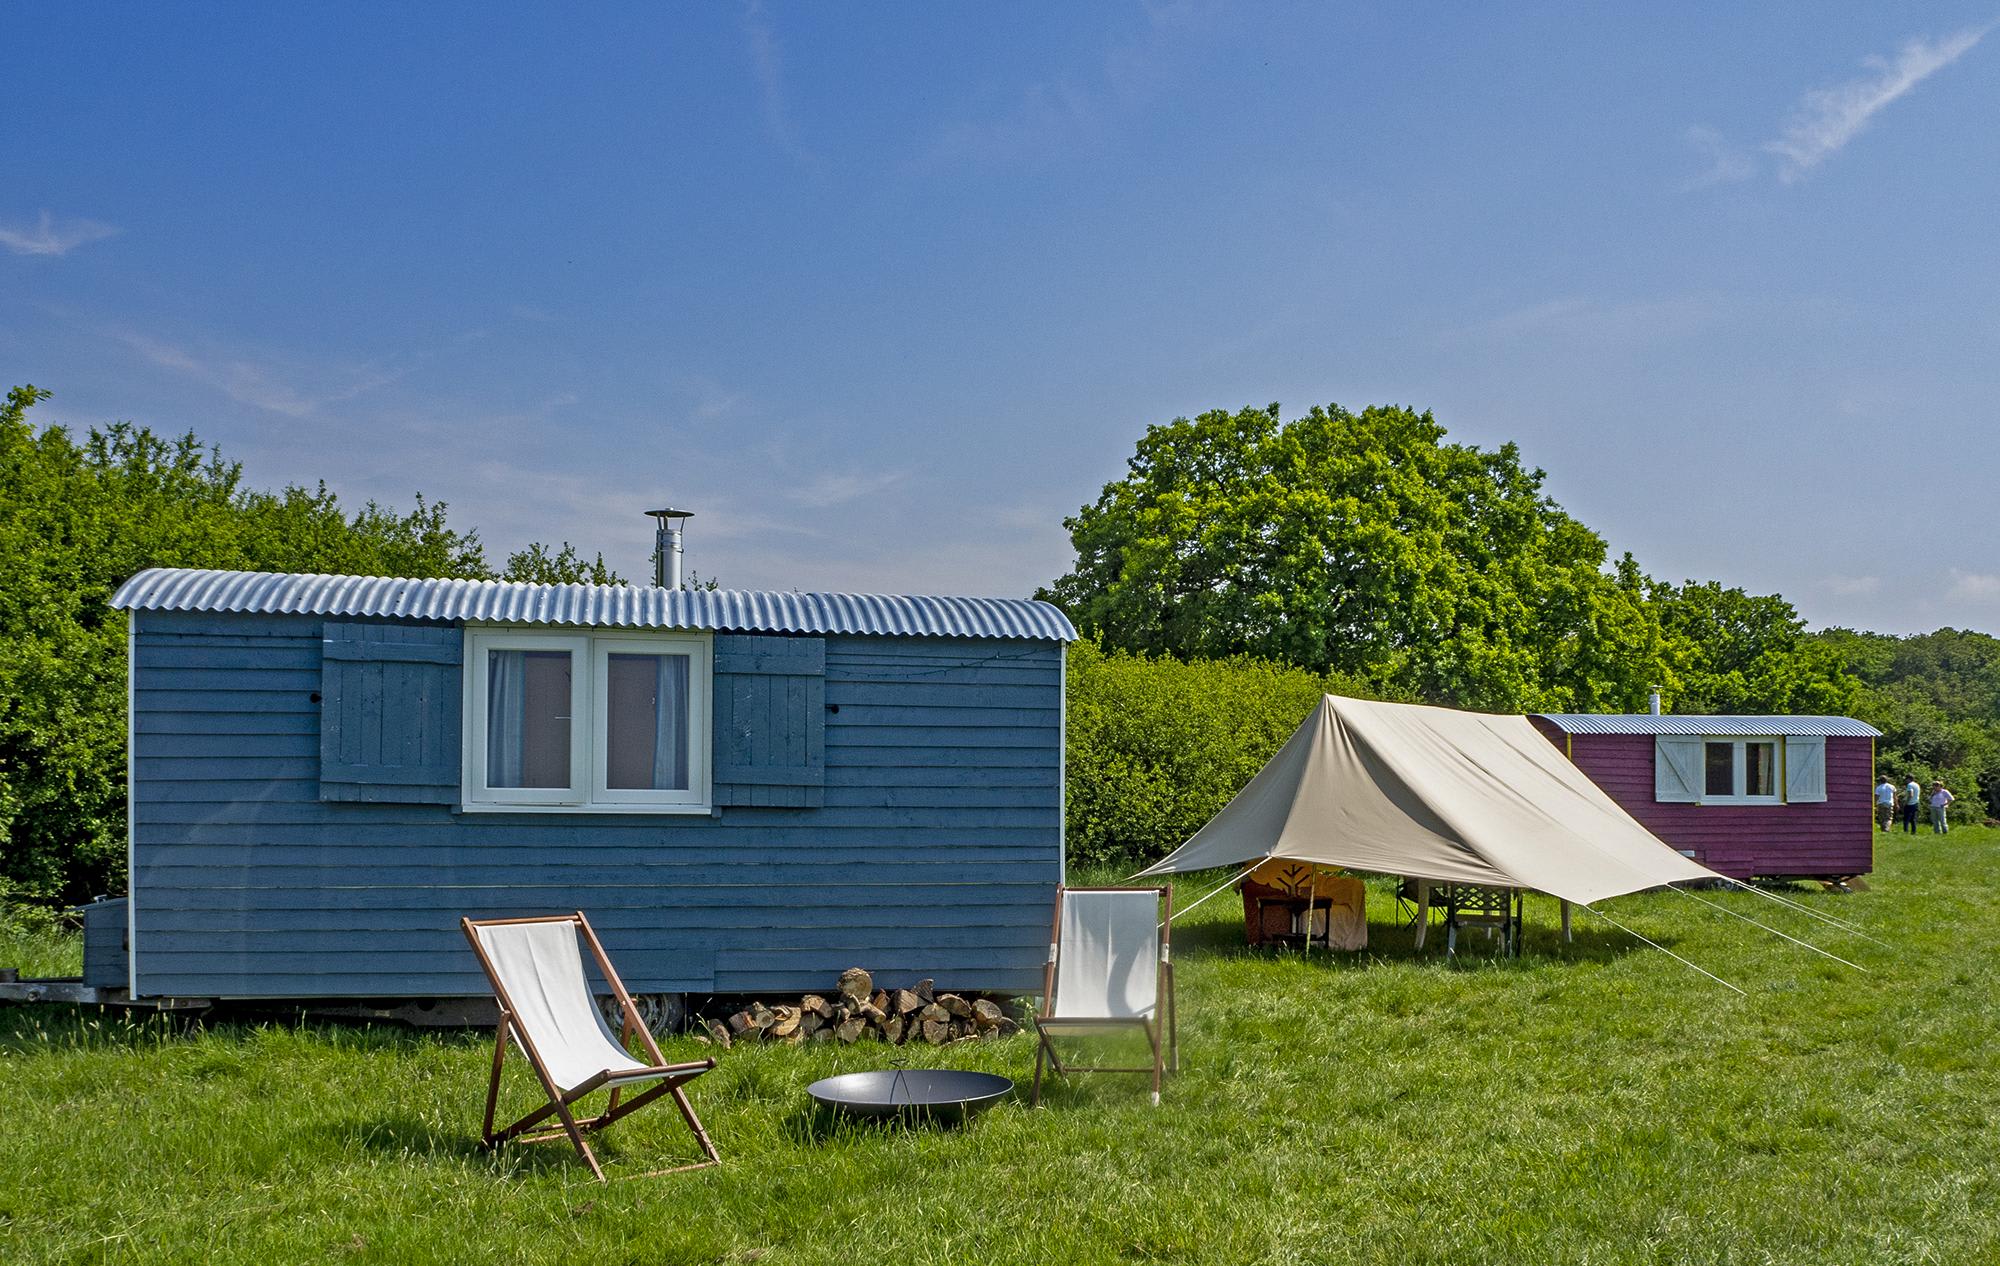 Ellenden Farm Glamping is near Whitstable in Kent and is home to three shepherd’s huts and two bell tents.